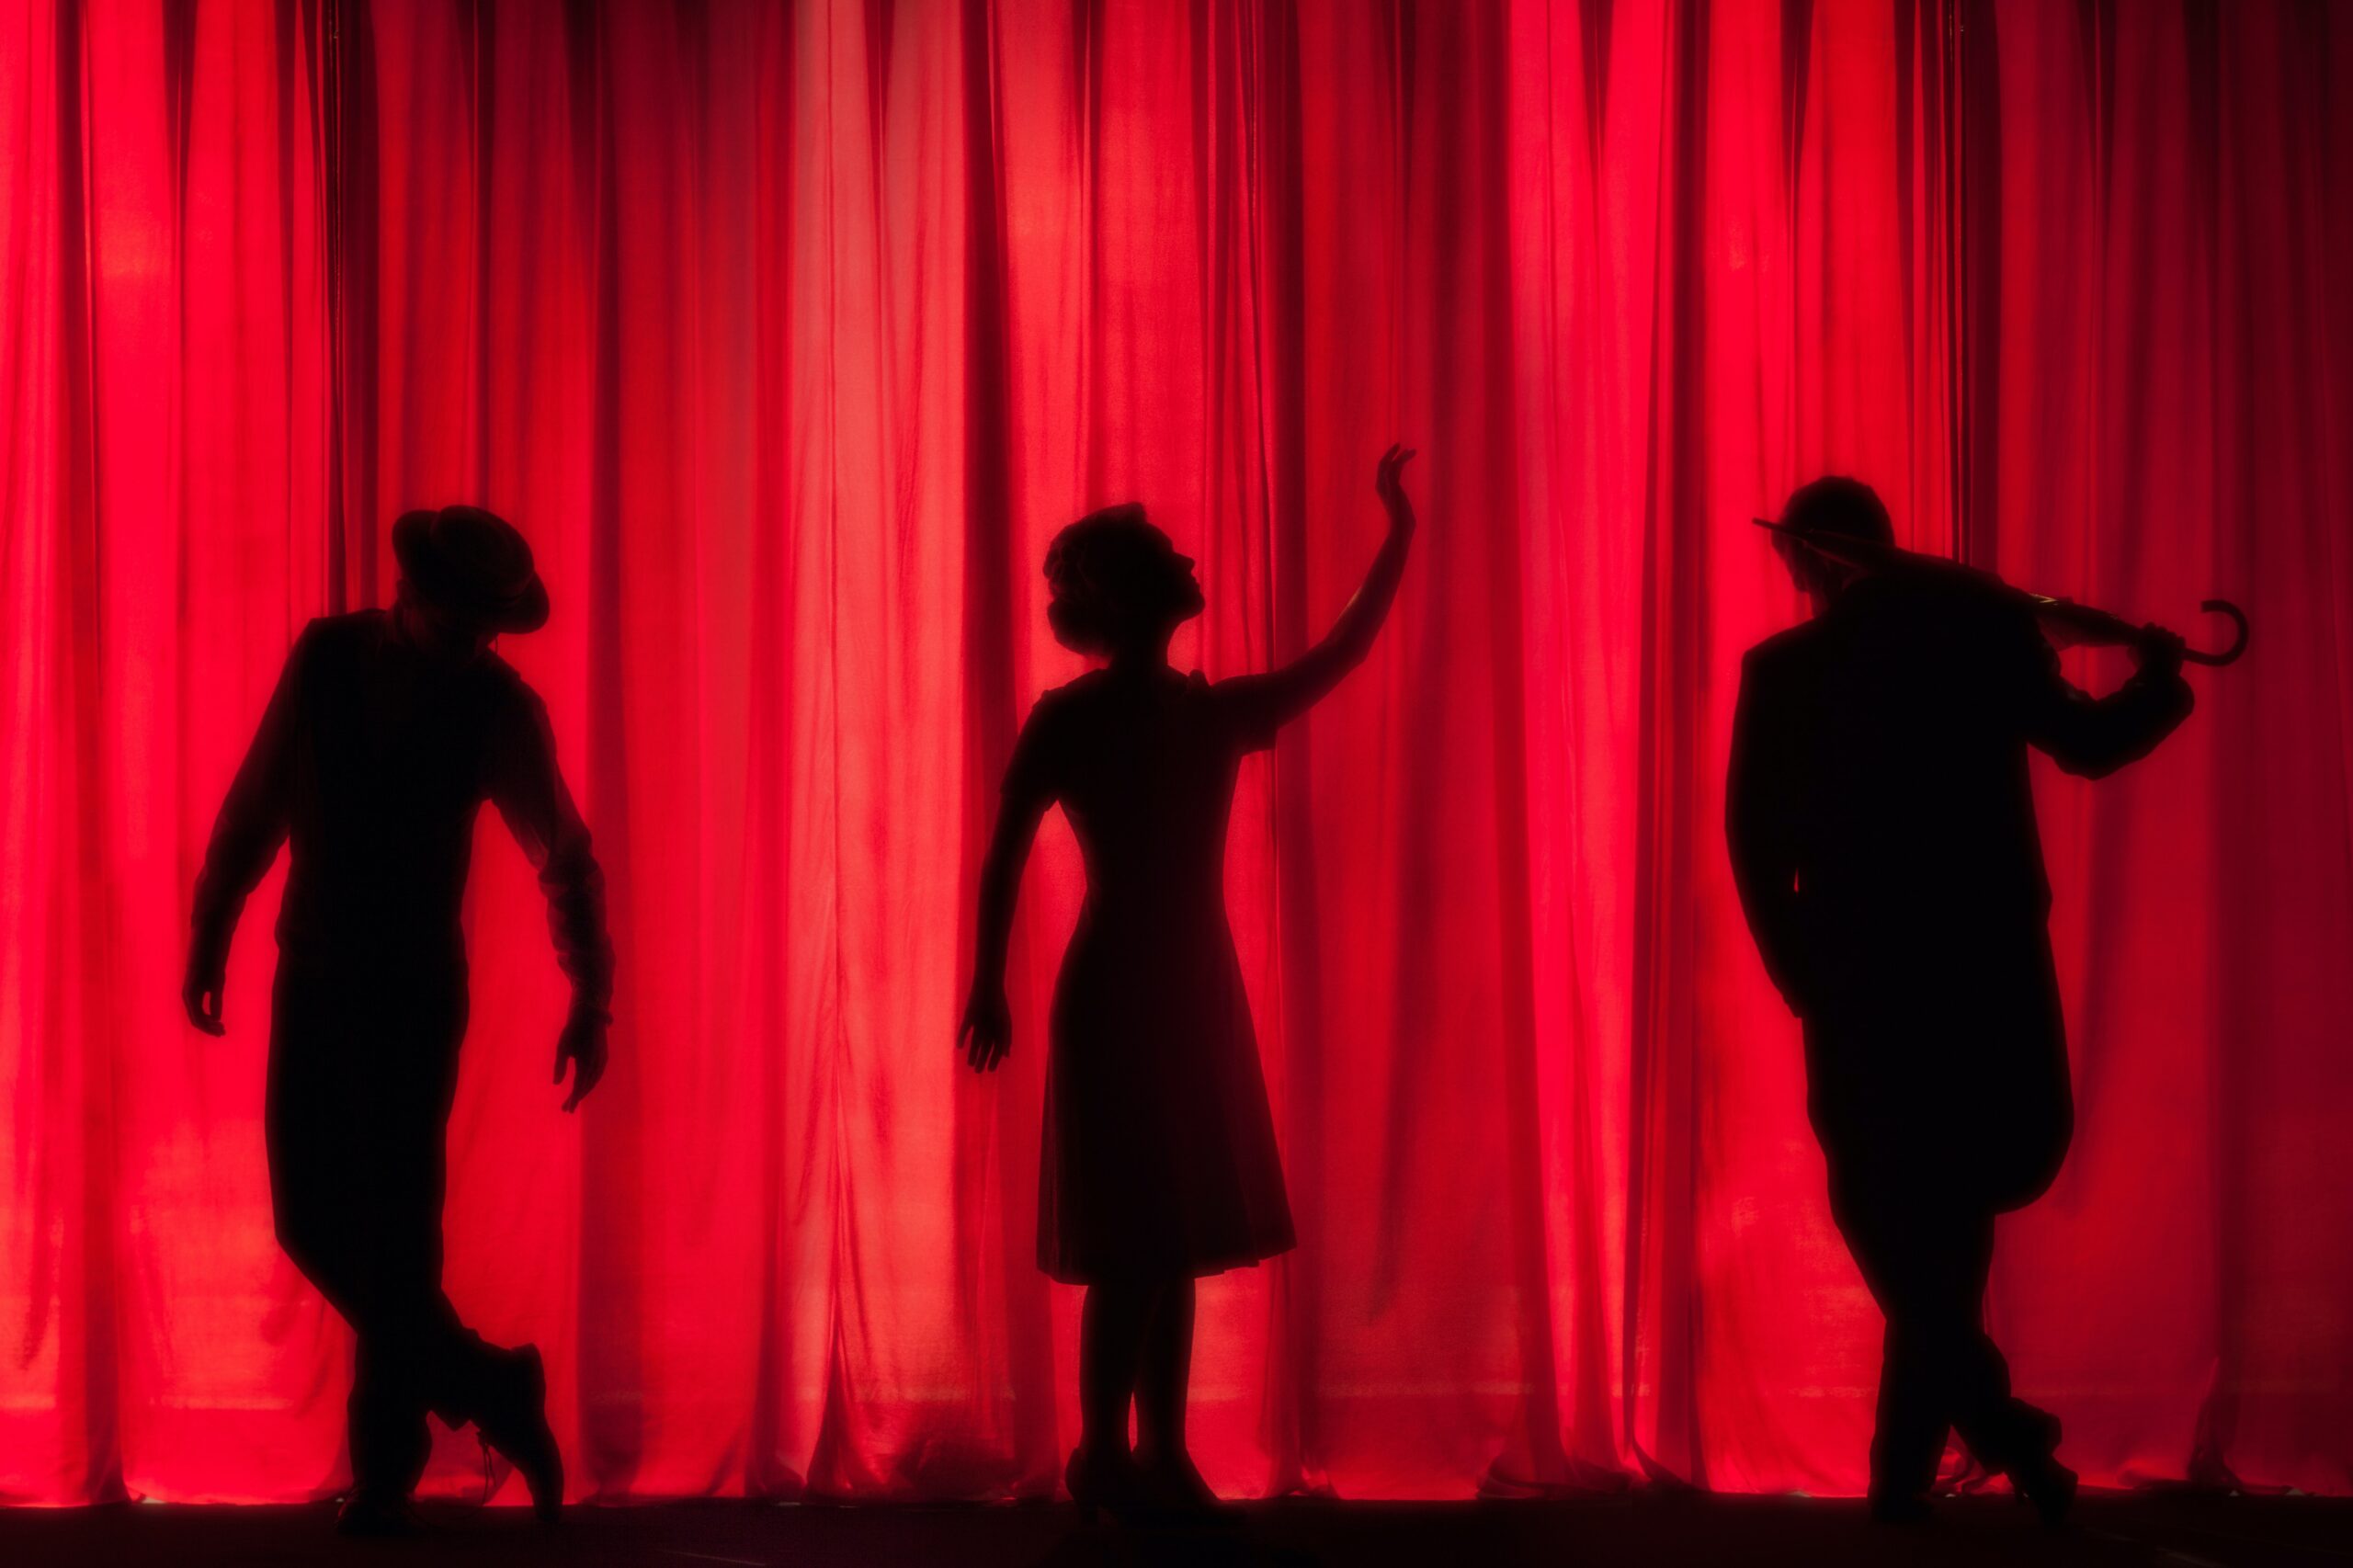 Performers in front of a red curtain